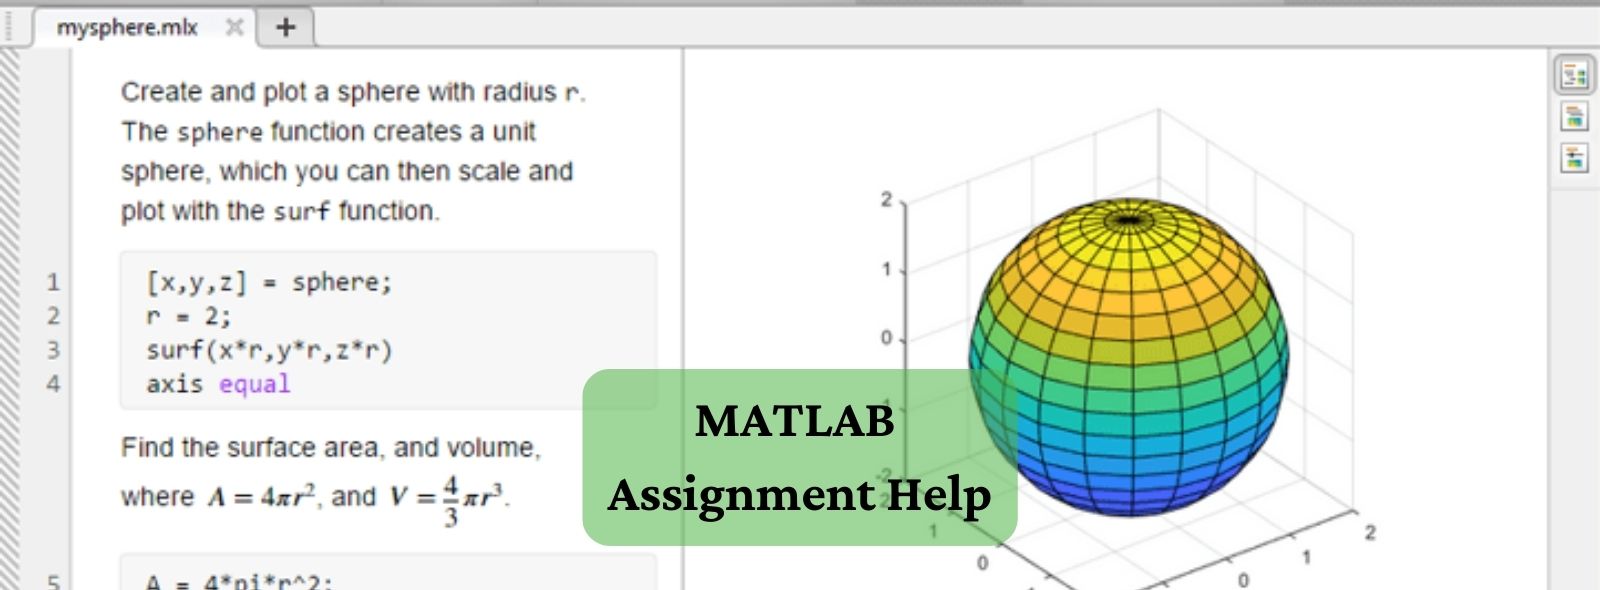 Image Processing in MATLAB Assignment Help